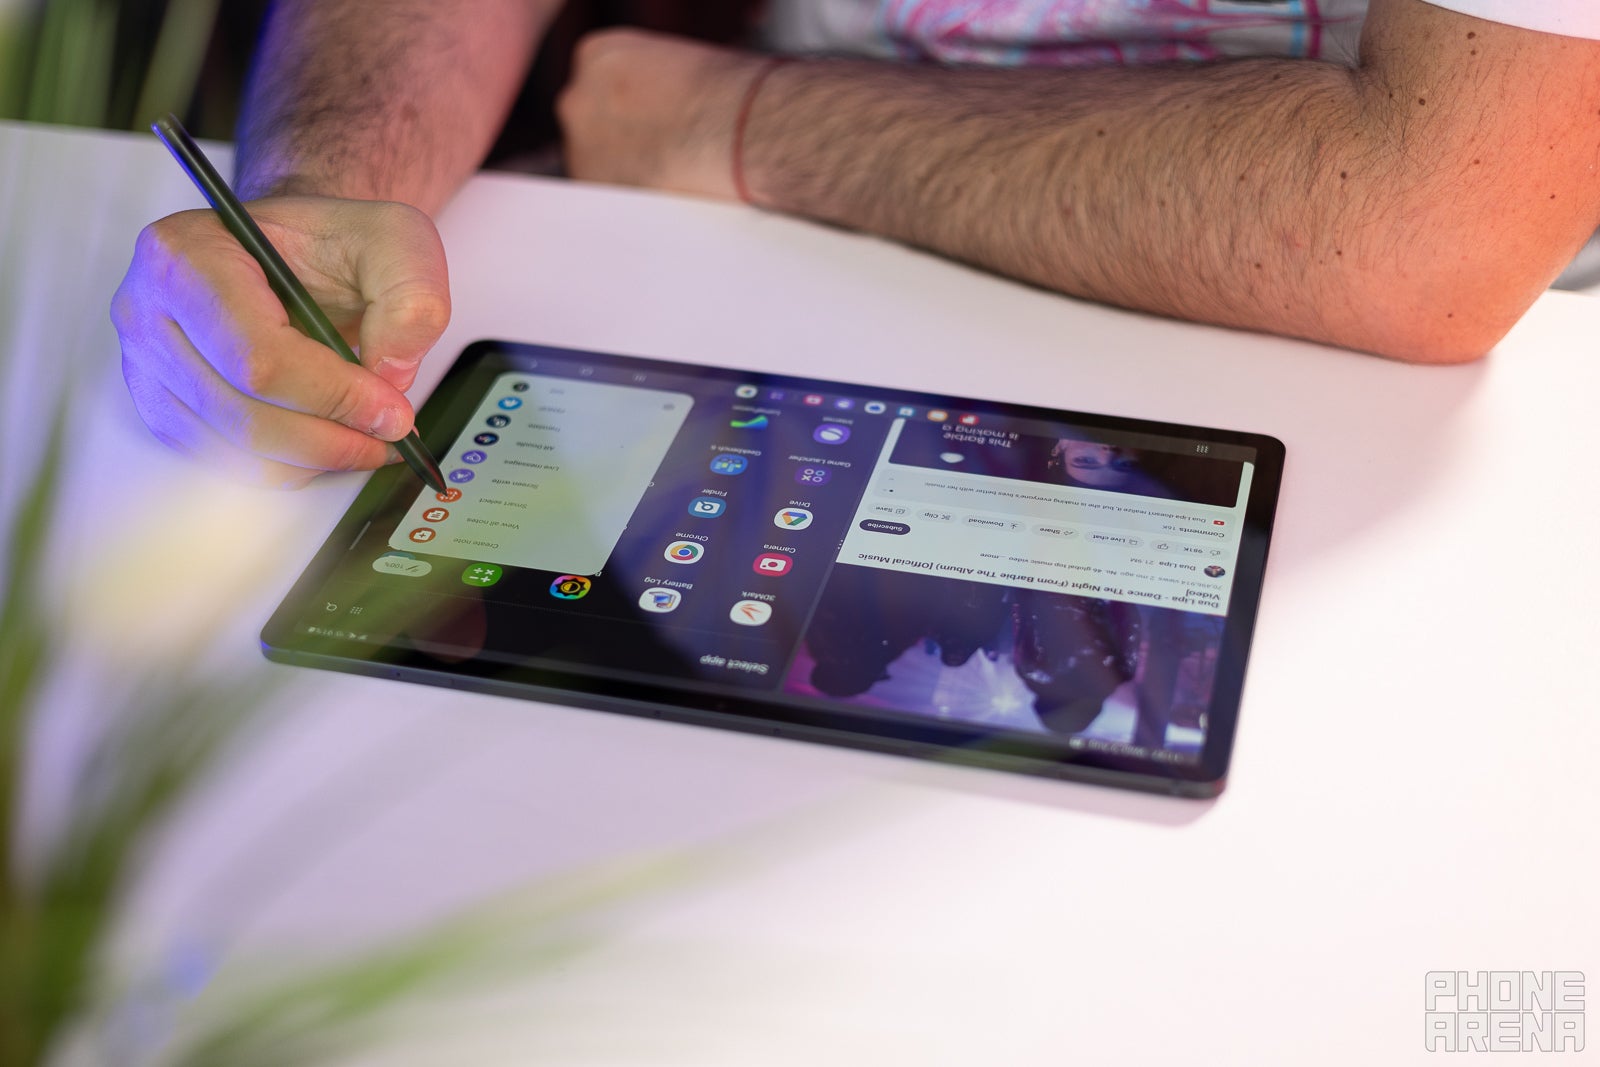 Samsung Galaxy Tab S7 FE review: Competition, our verdict, pros and cons